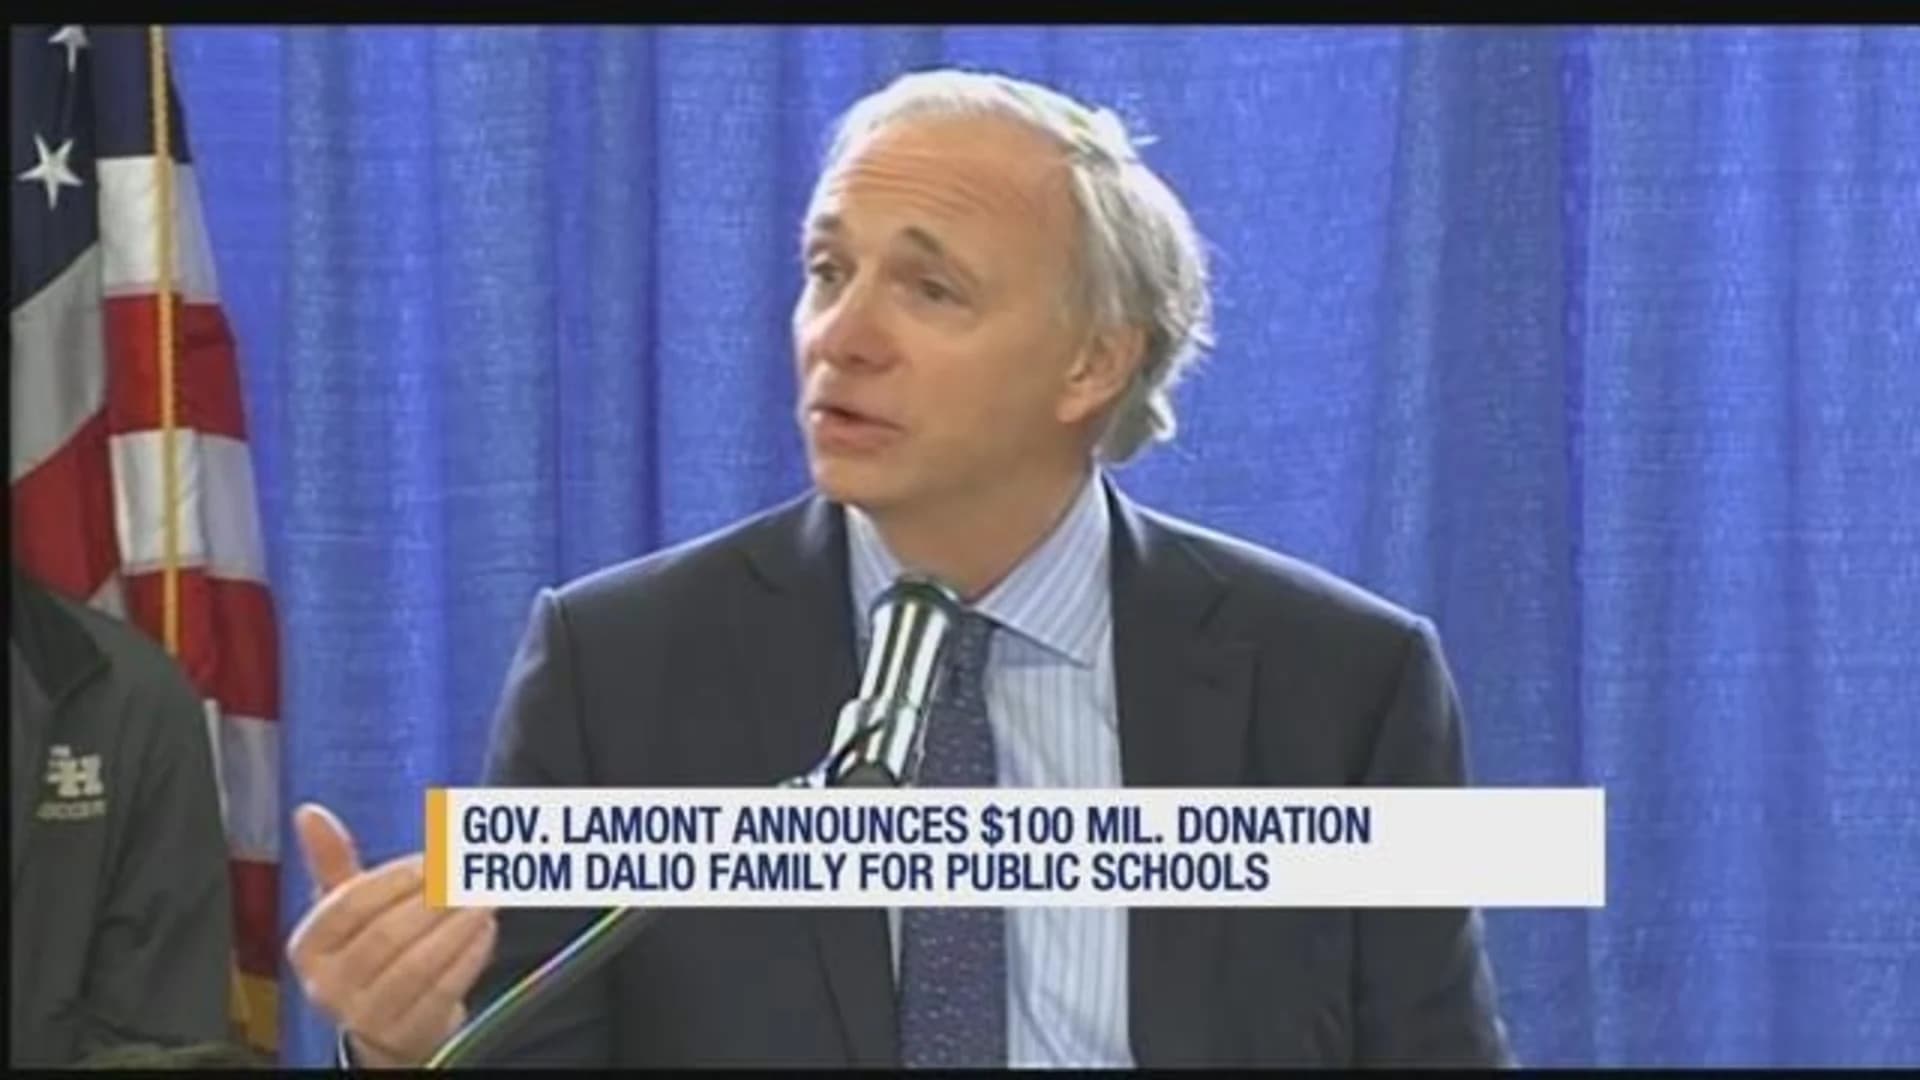 Lamont: State will match $100M donation to public schools